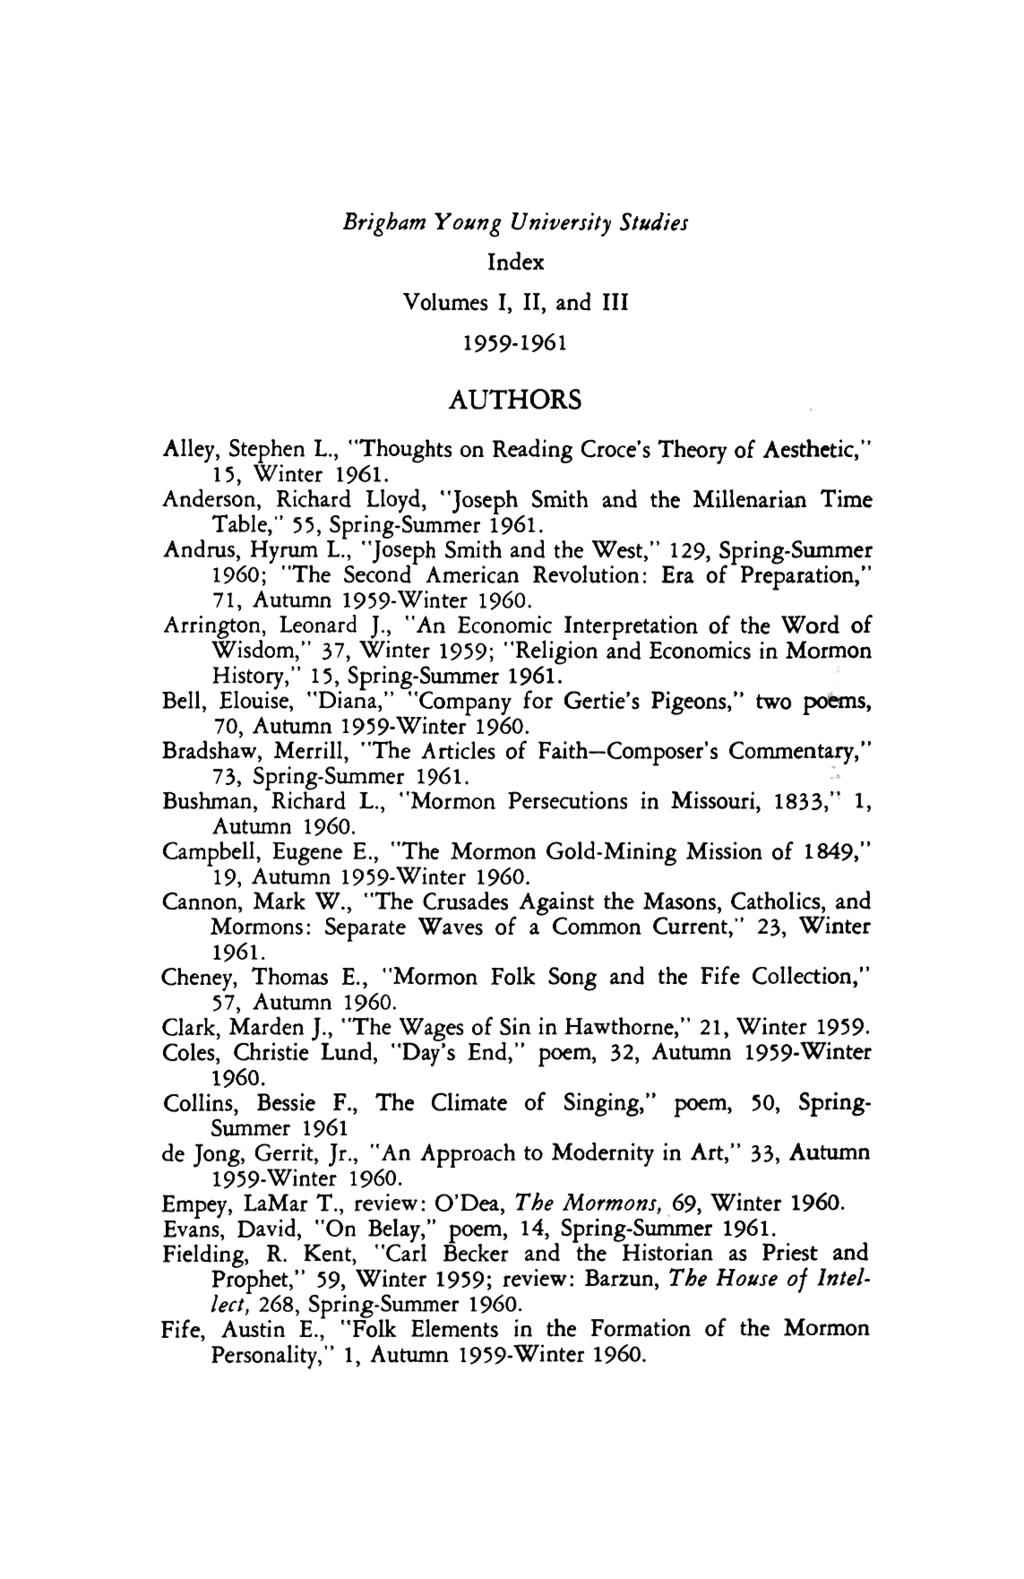 alley stephen L brigham bigham young university studies volumes I1 index 1959 ili II 11 and III 111 AUTHORS thoughts on reading croce s theory of aesthetic 15 winter anderson richard lloyd joseph